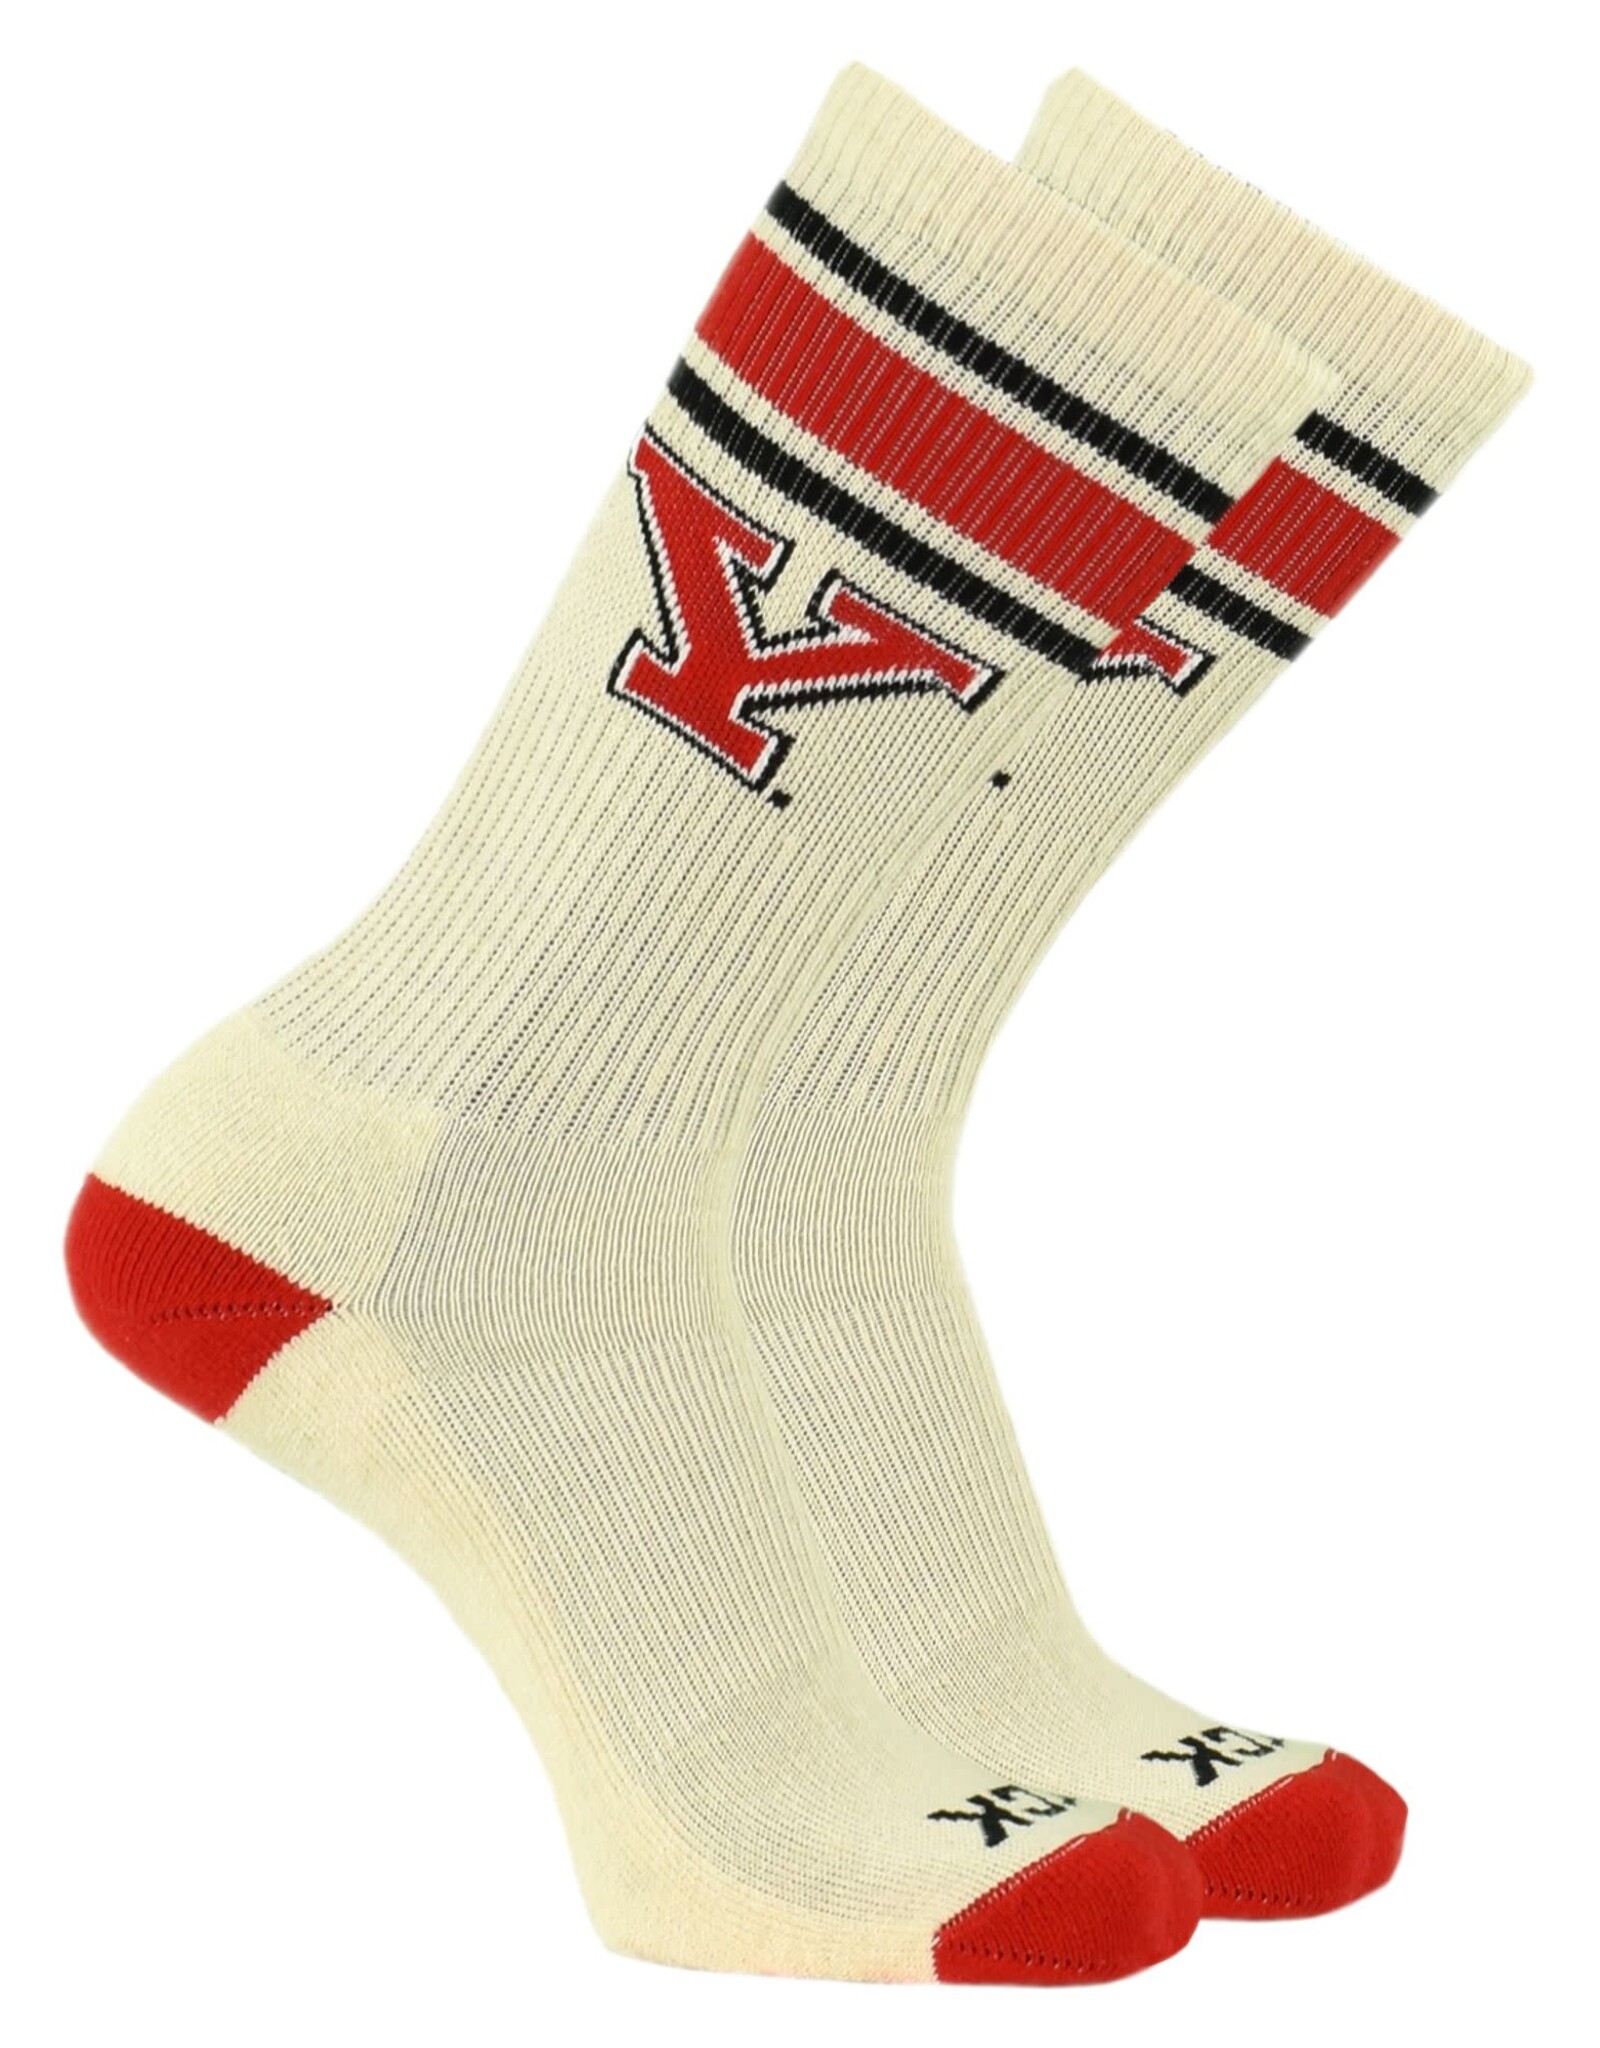 TWIN CITY KNITTING CO Youngstown State Penguins Vintage Crew Socks